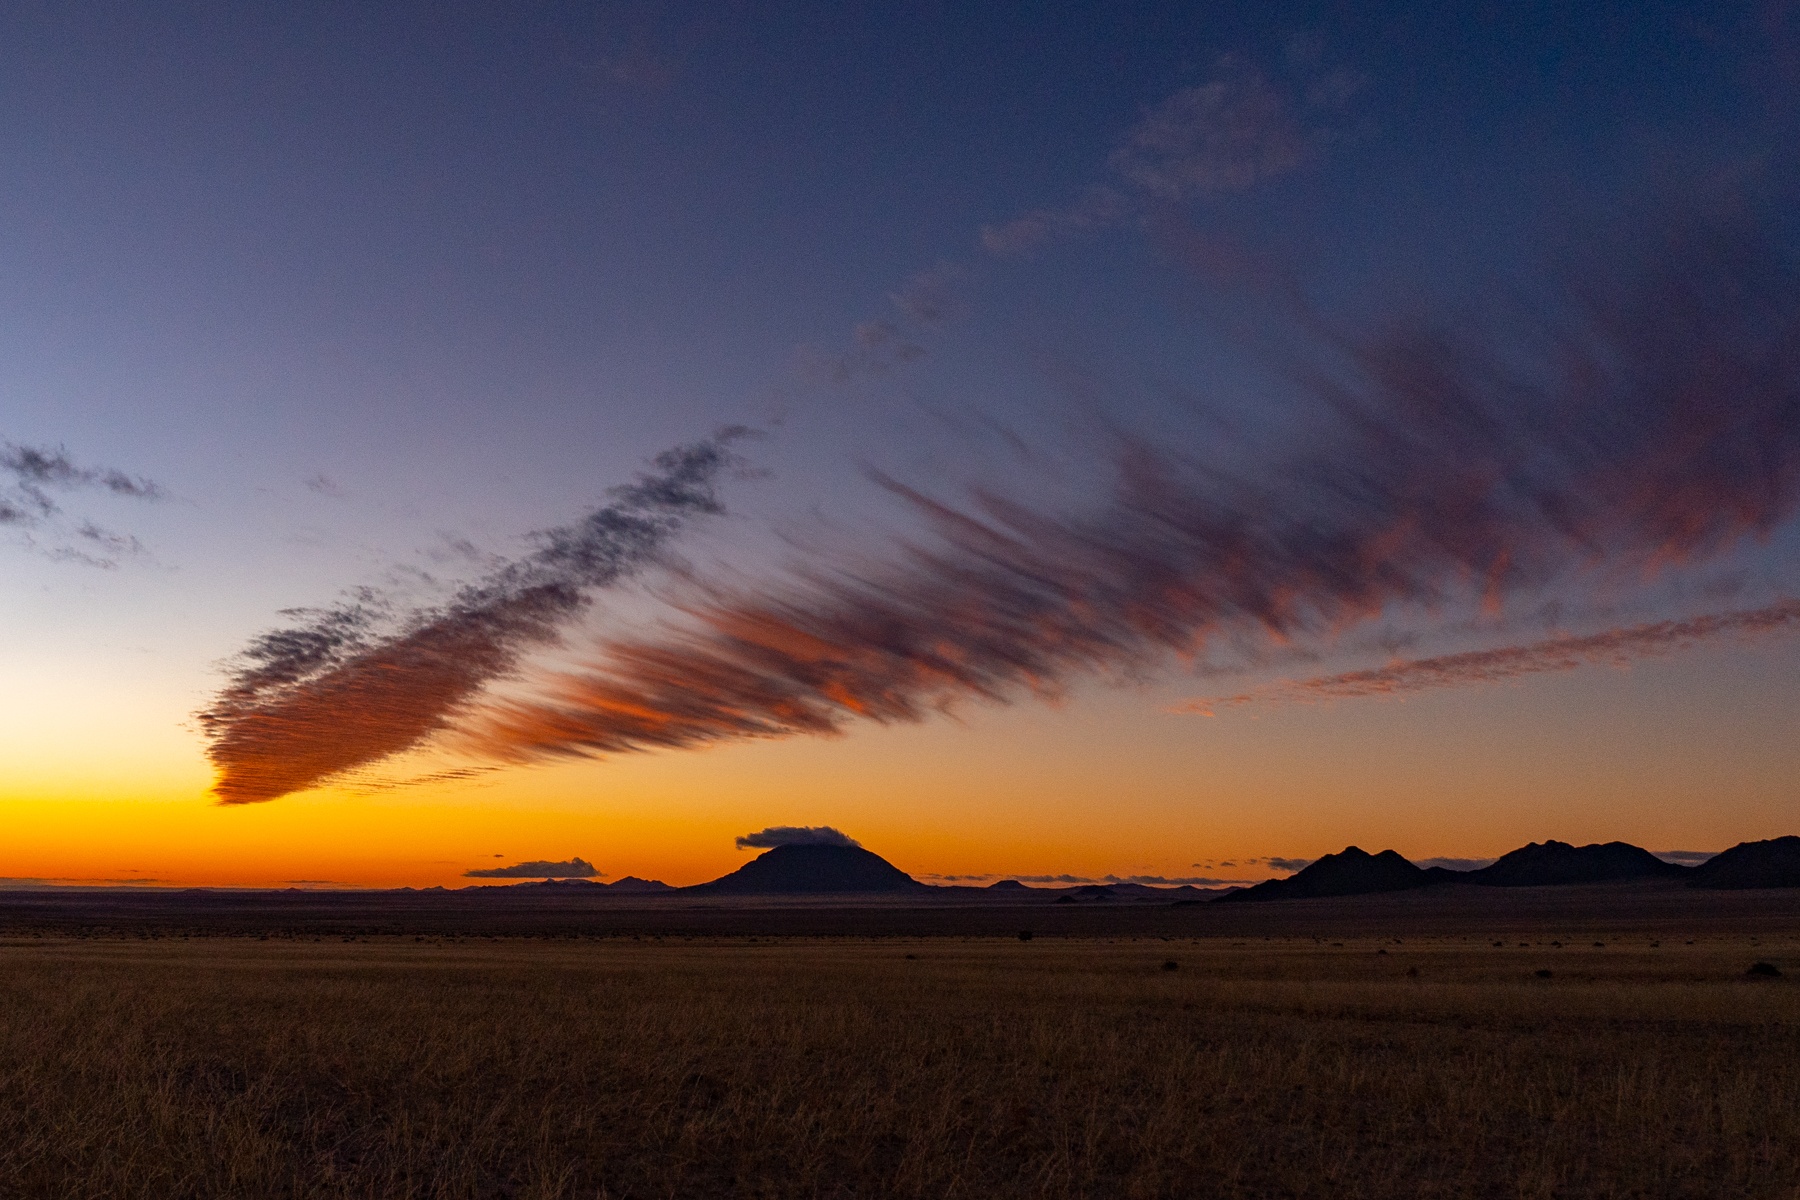 Stunning sunset in Tsau Khaeb National Park, southern Namibia on our photography tour